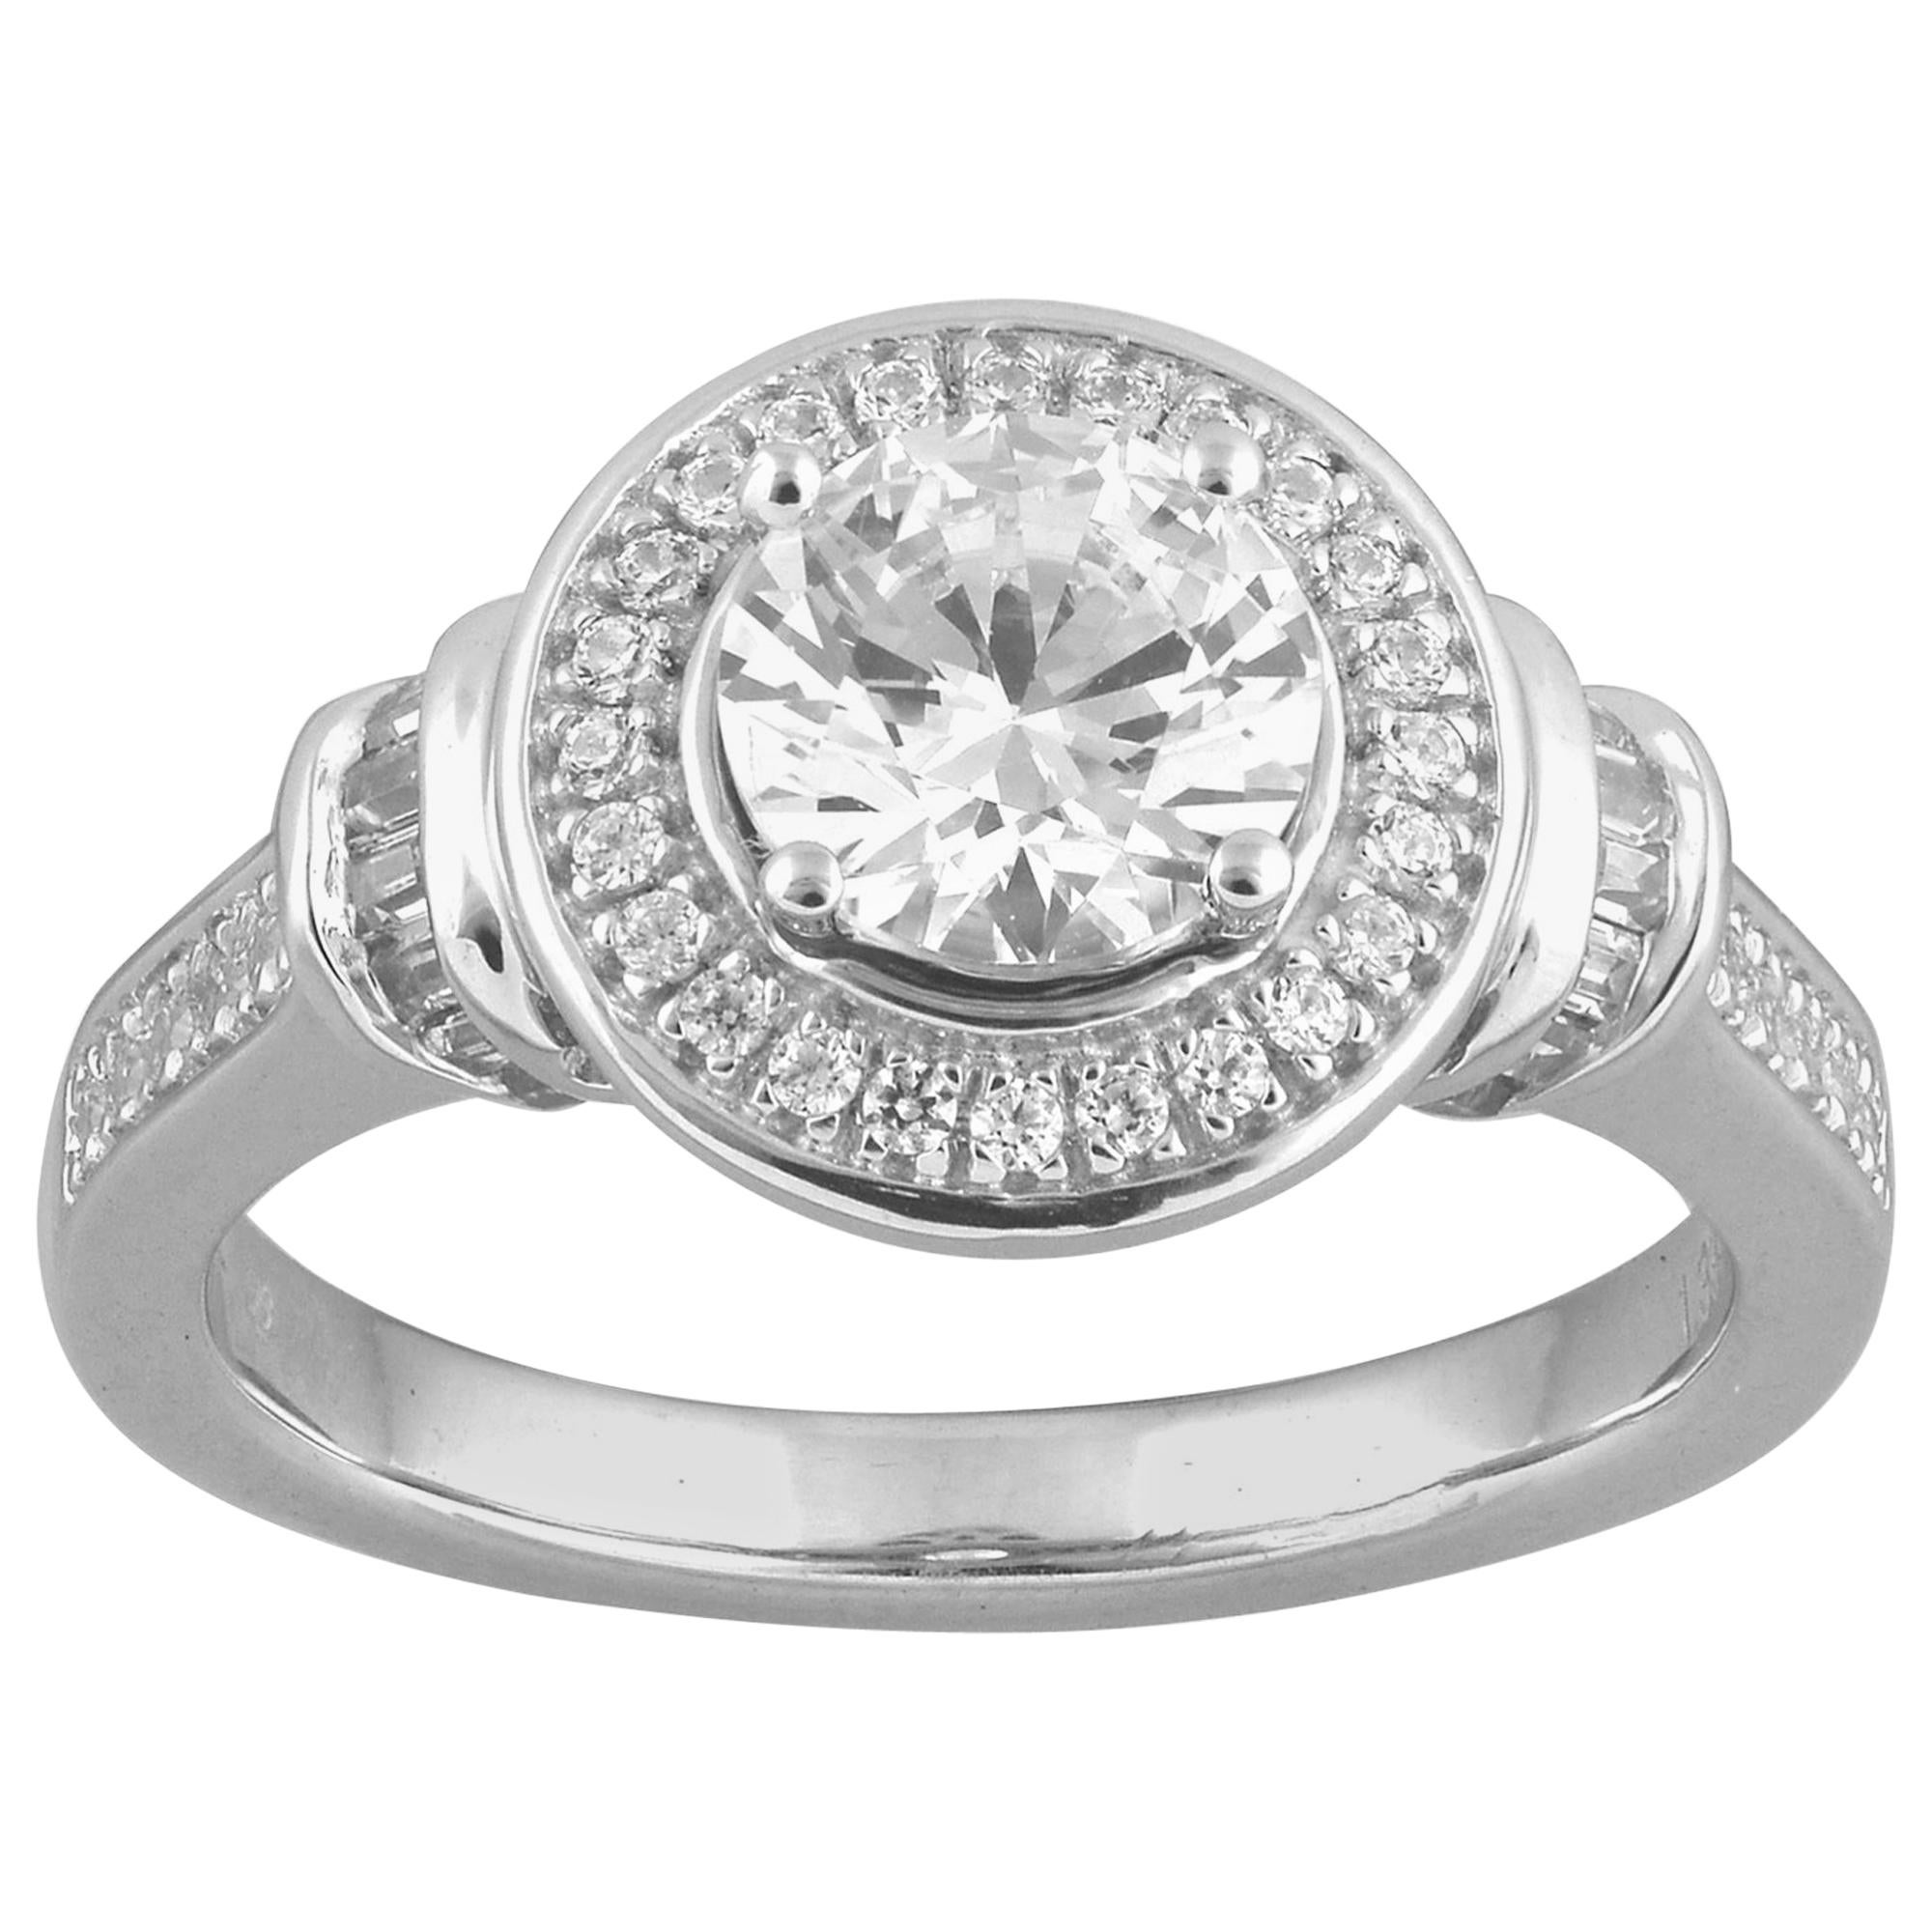 TJD 1.33 Carat Round and Baguette Diamond 18 KT White Gold Halo Engagement Ring For Sale